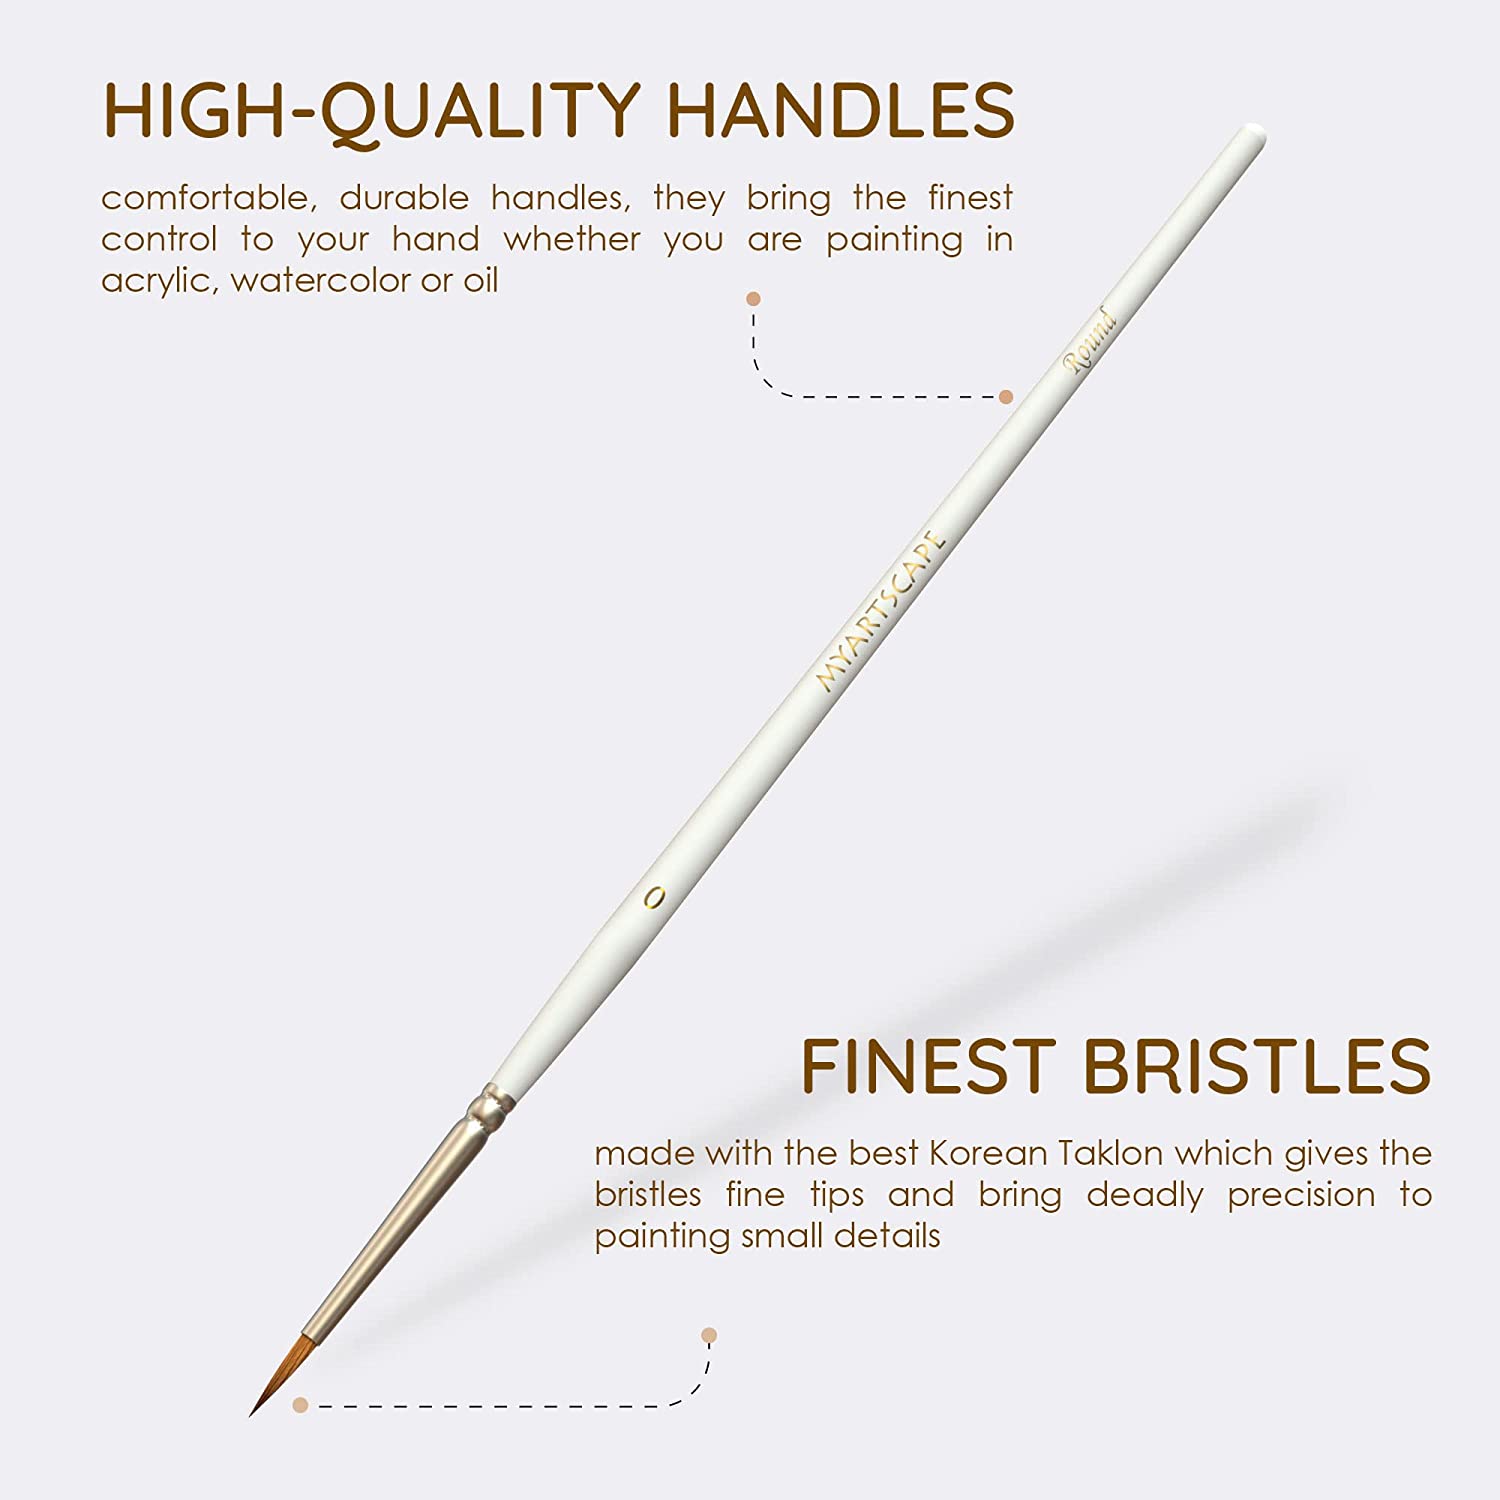  Miniature Paint Brushes with case,12pcs Detail Paintbrushes Set Small  Paint Brushes for Miniature Painting,d&d Figurines,Model,Warhammer  40k,Detail Work,Citadel Paint,Paint by Numbers